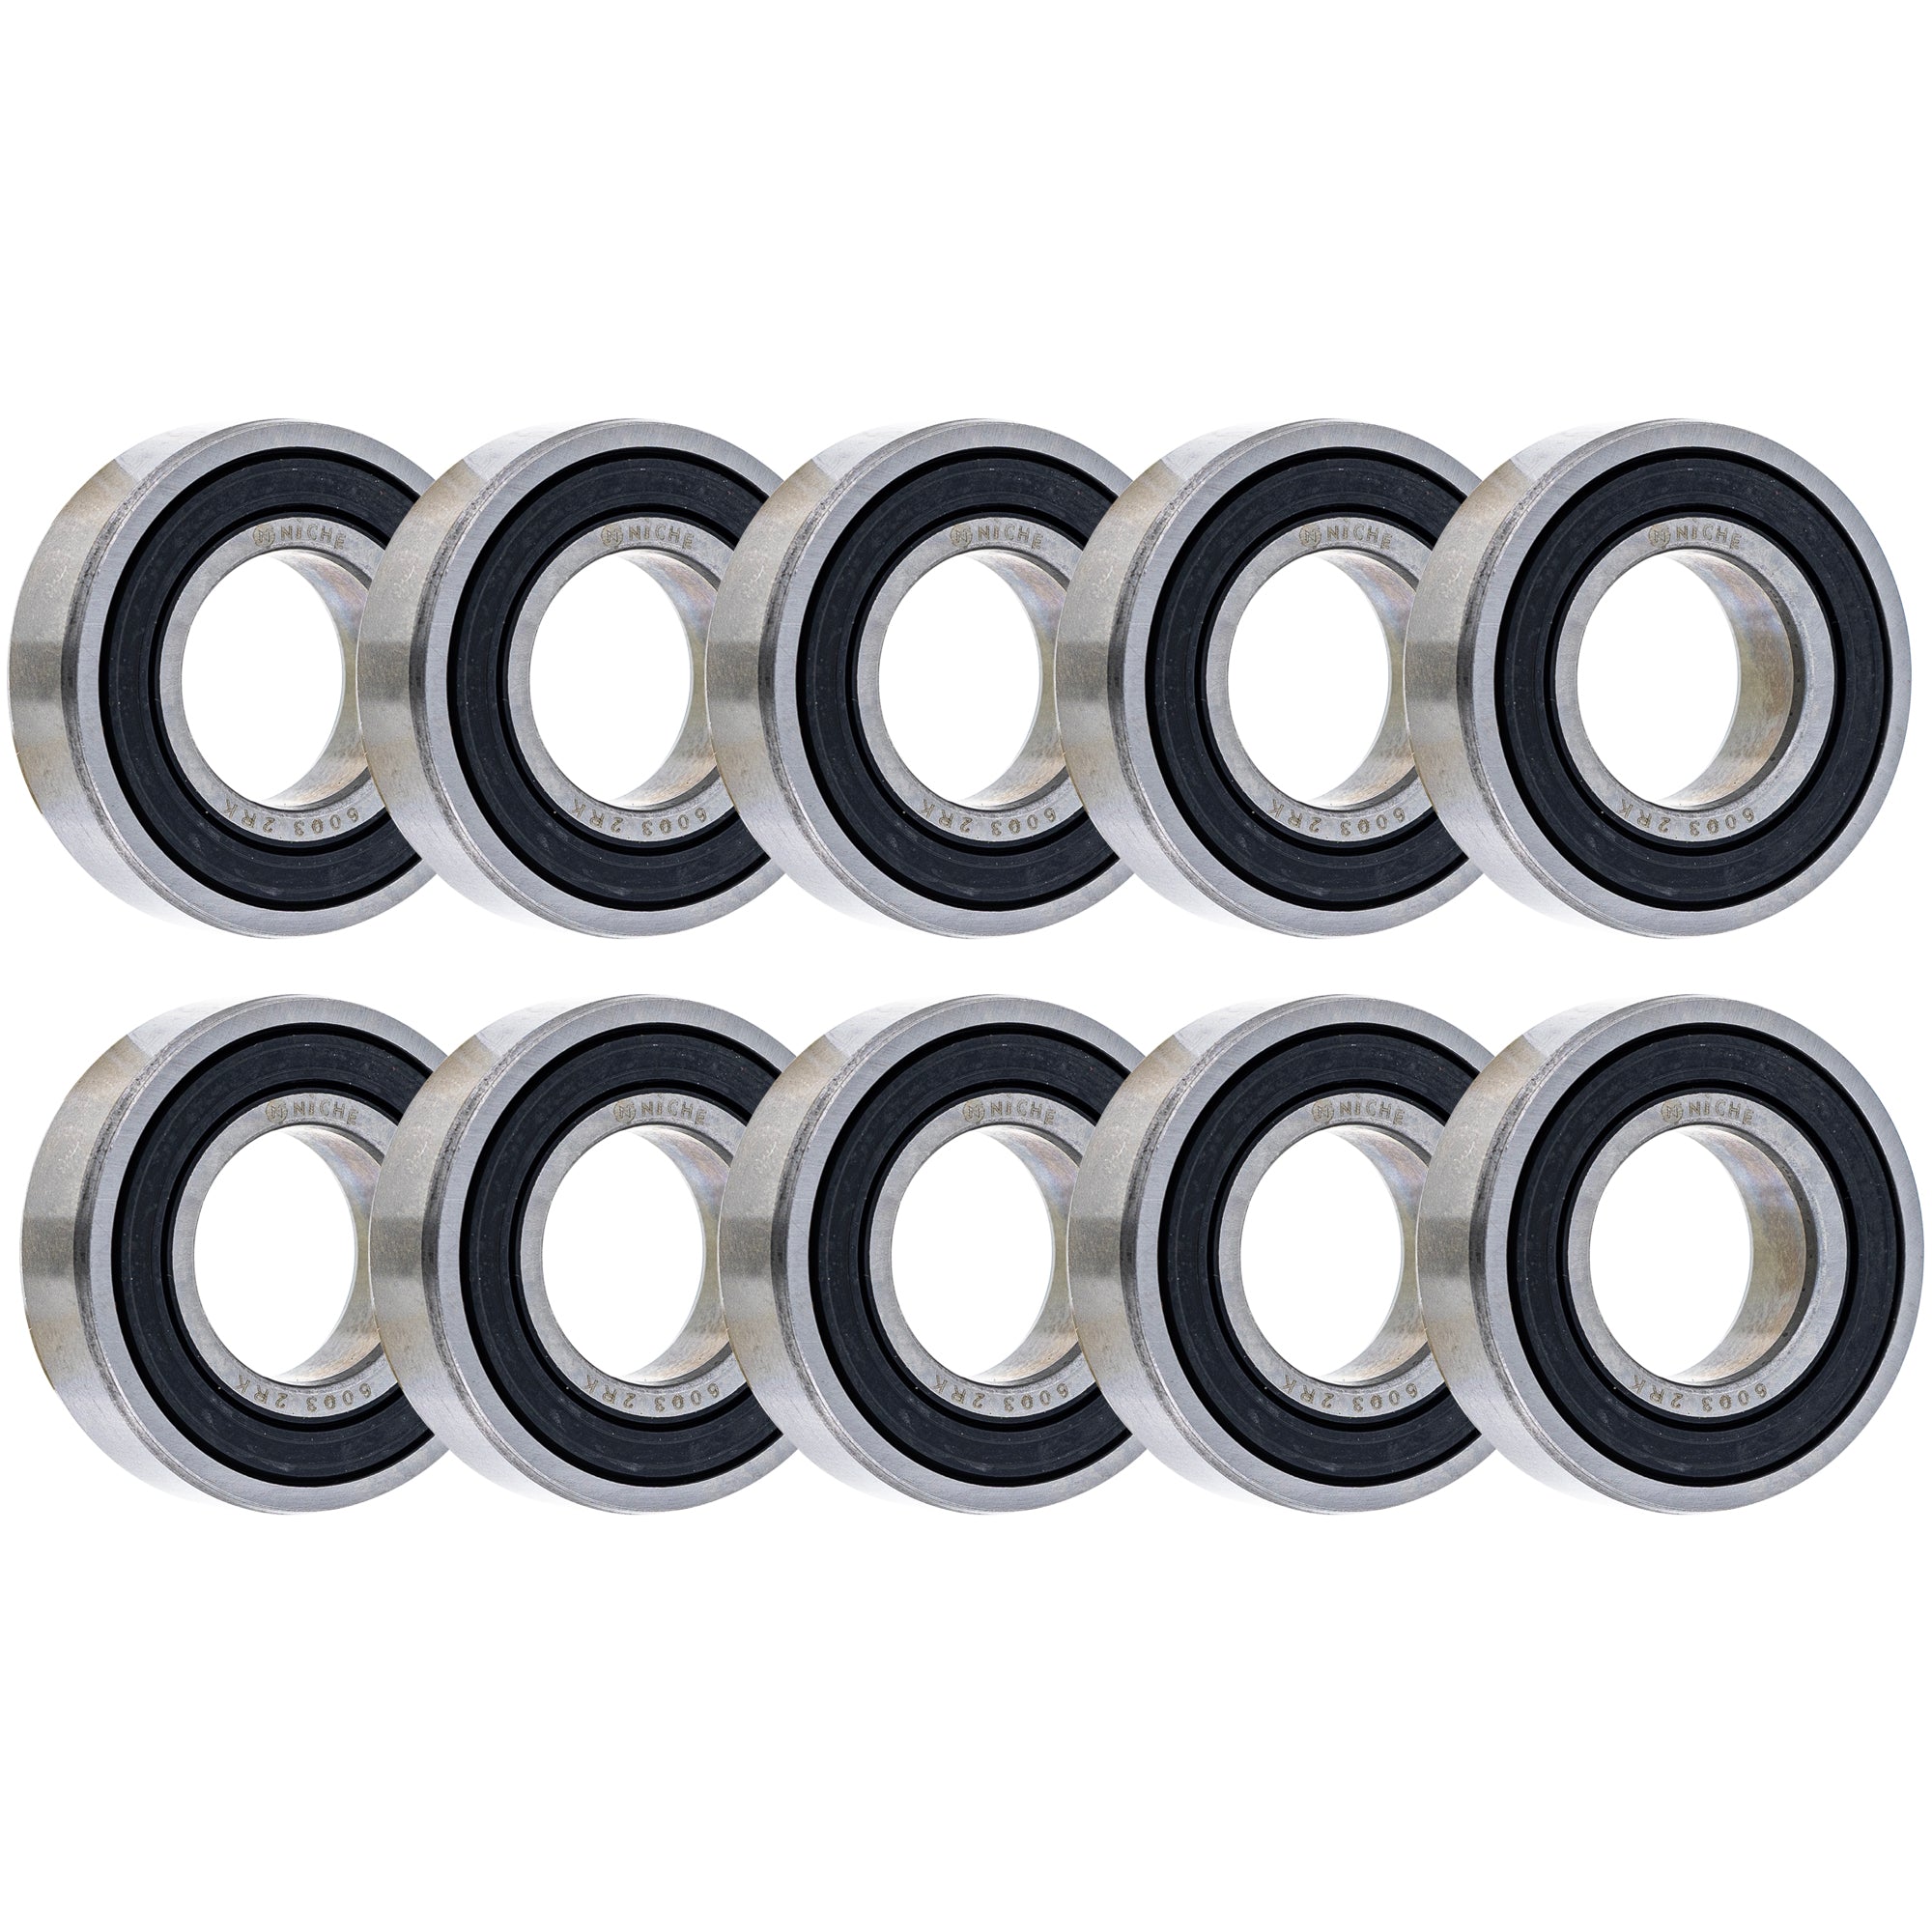 Electric Grade, Single Row, Deep Groove, Ball Bearing Pack of 10 10-Pack for zOTHER Arctic NICHE 519-CBB2325R